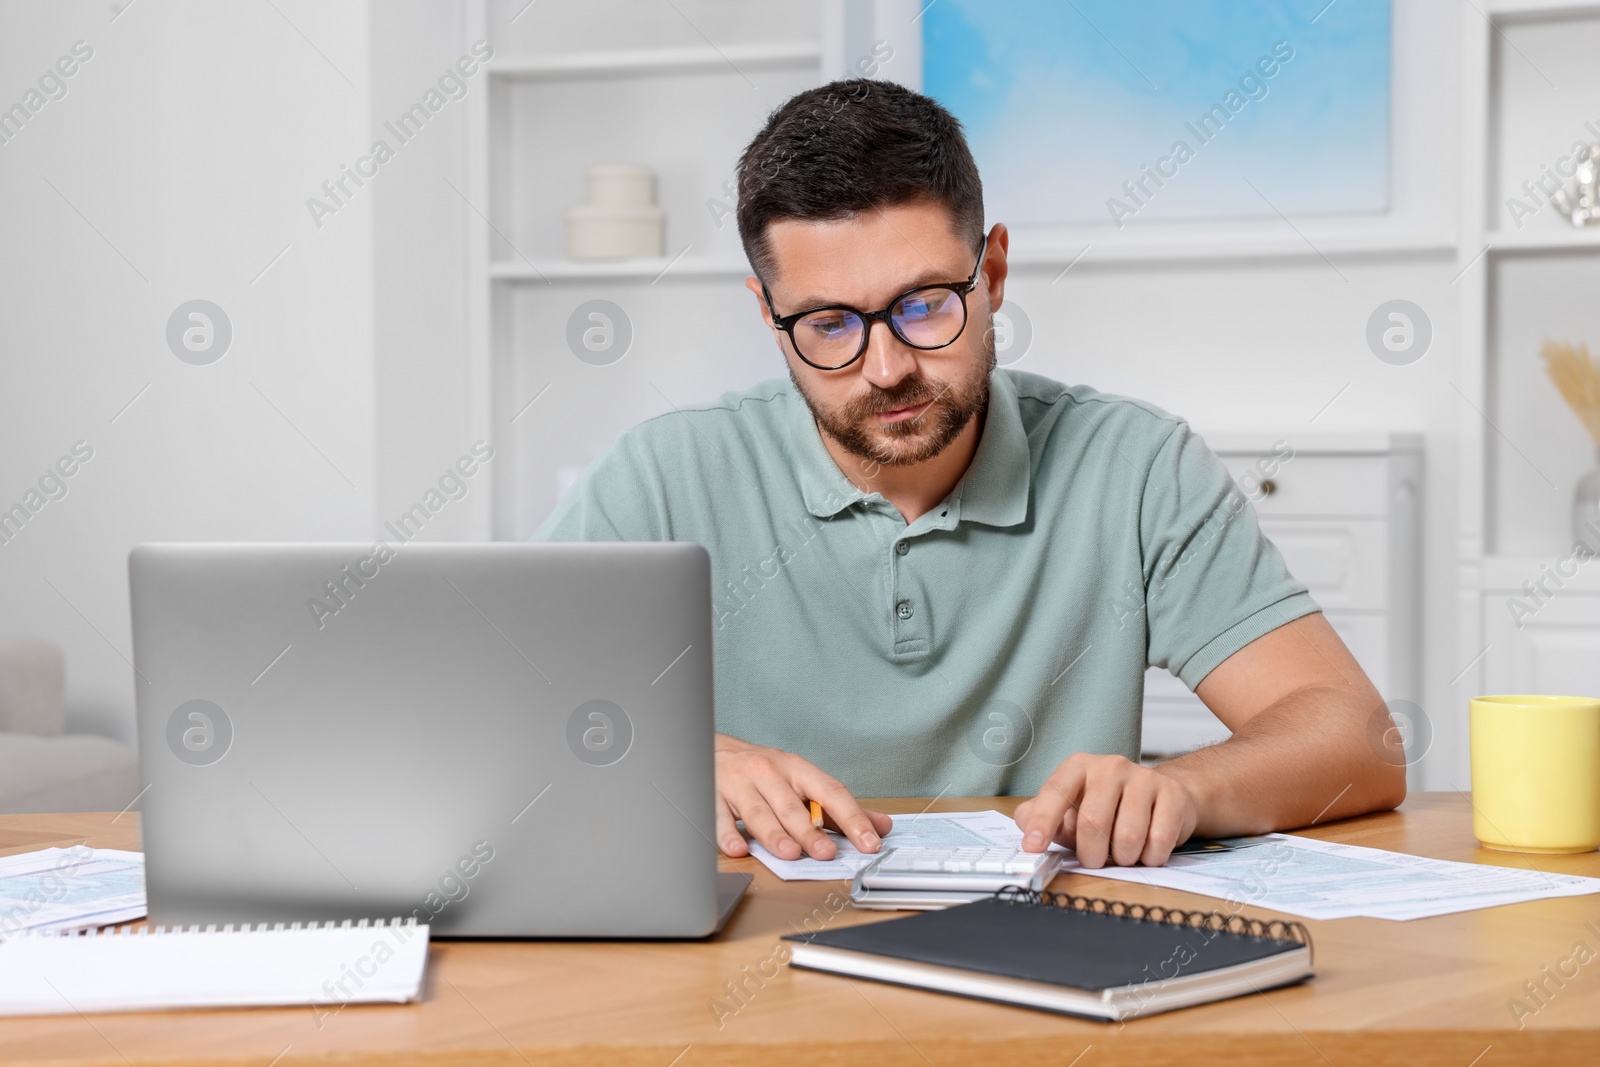 Photo of Man calculating taxes at table in room